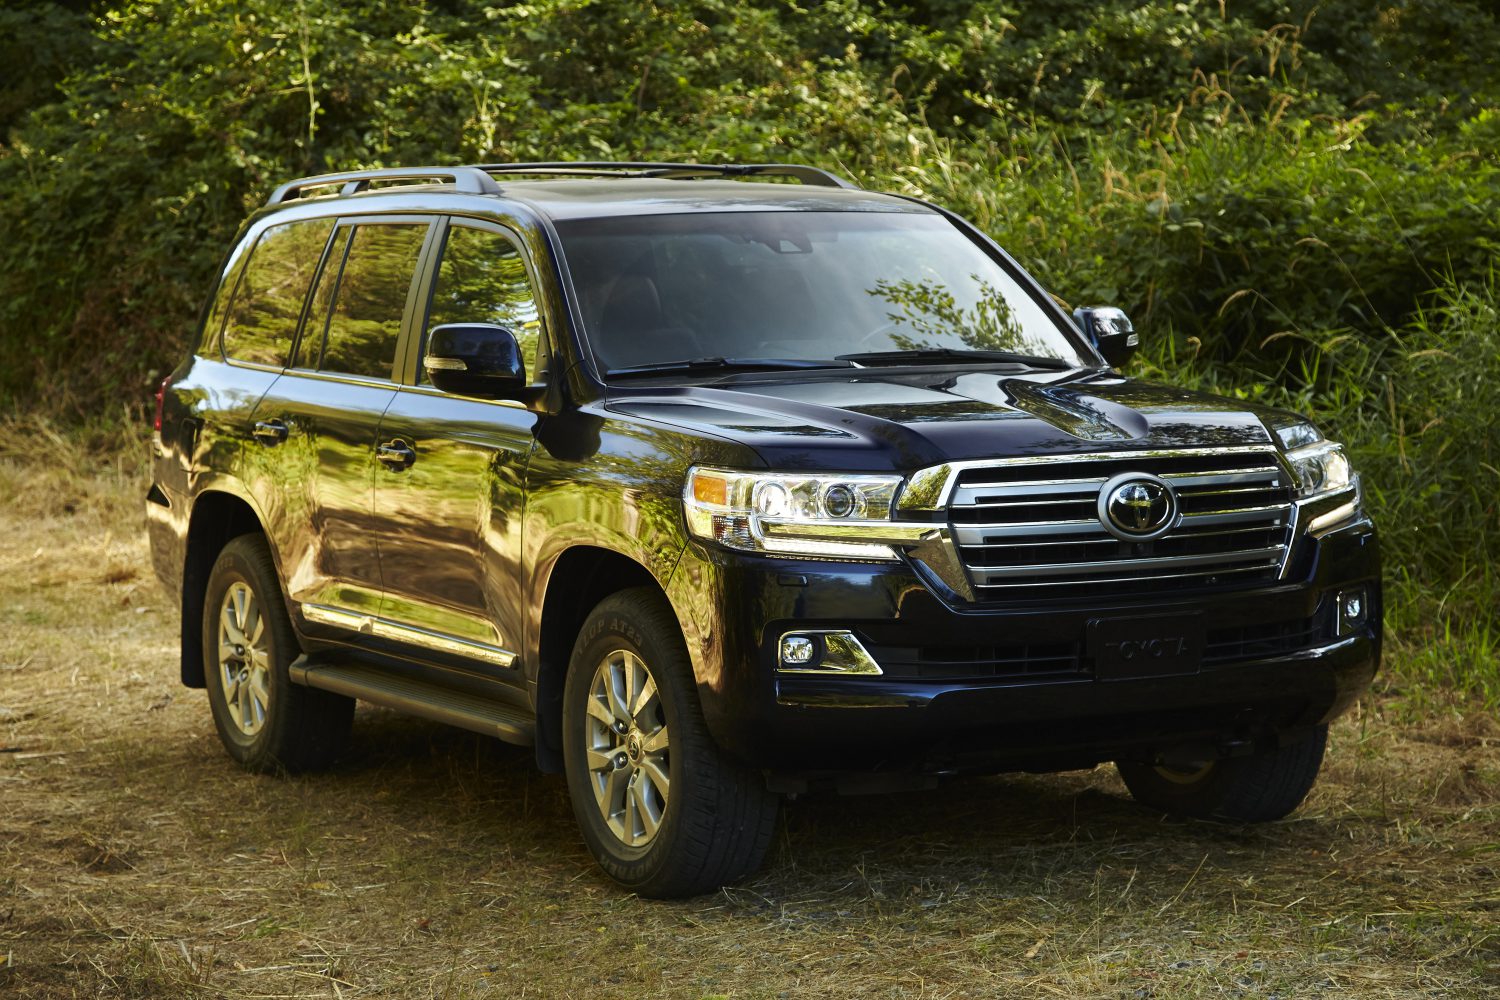 New And Used Toyota Land Cruiser Prices Photos Reviews Specs